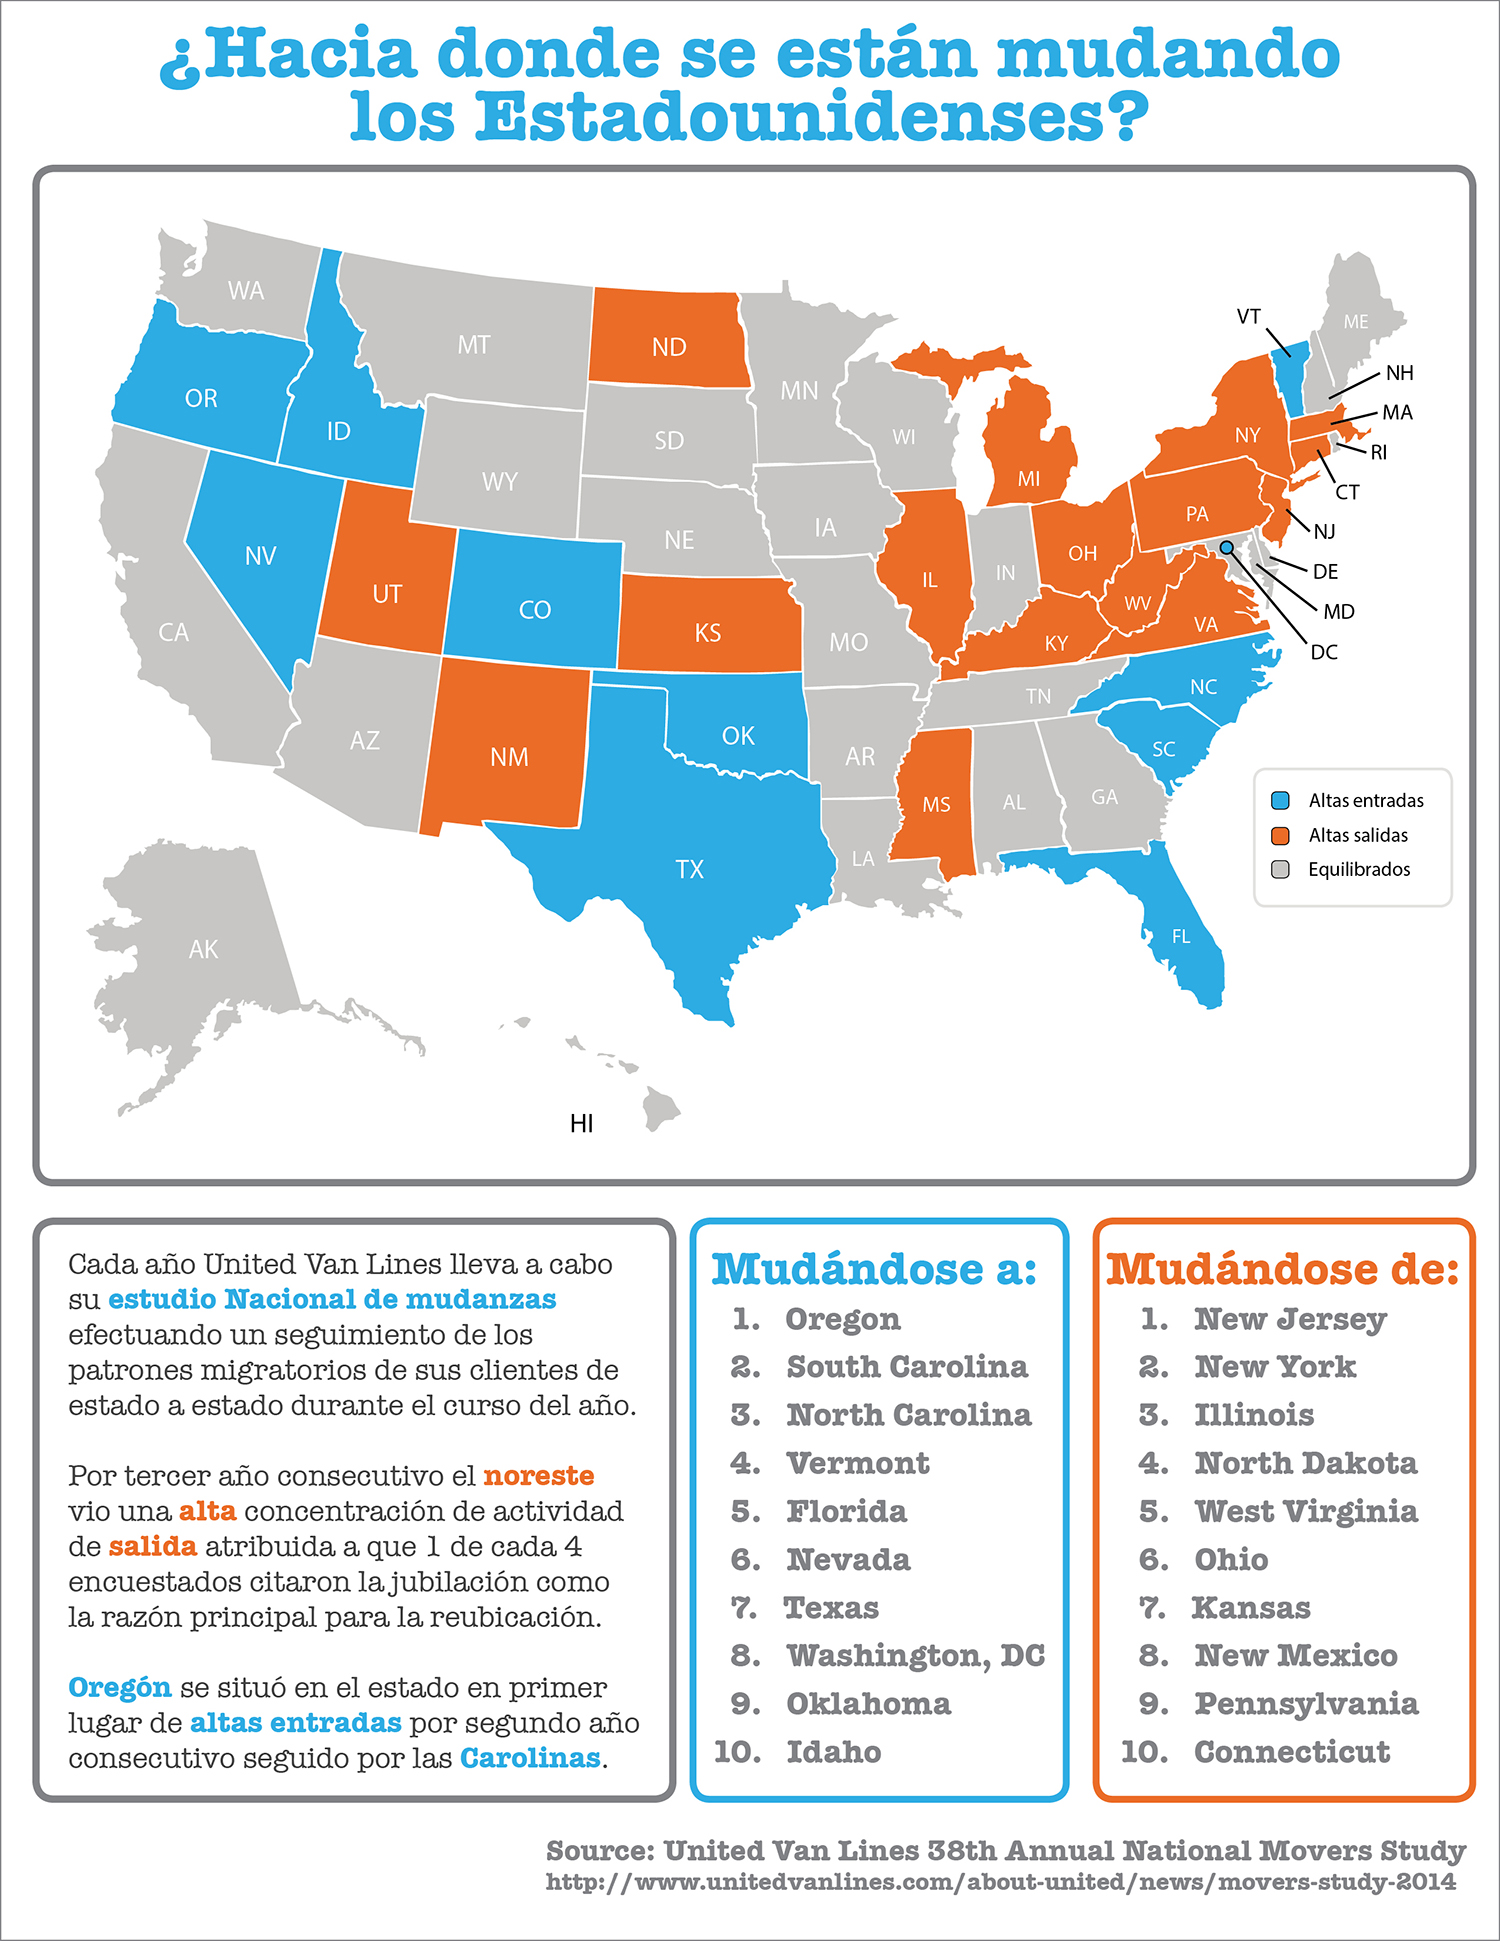 Moving Across America [INFOGRAPHIC] | Simplifying The Market